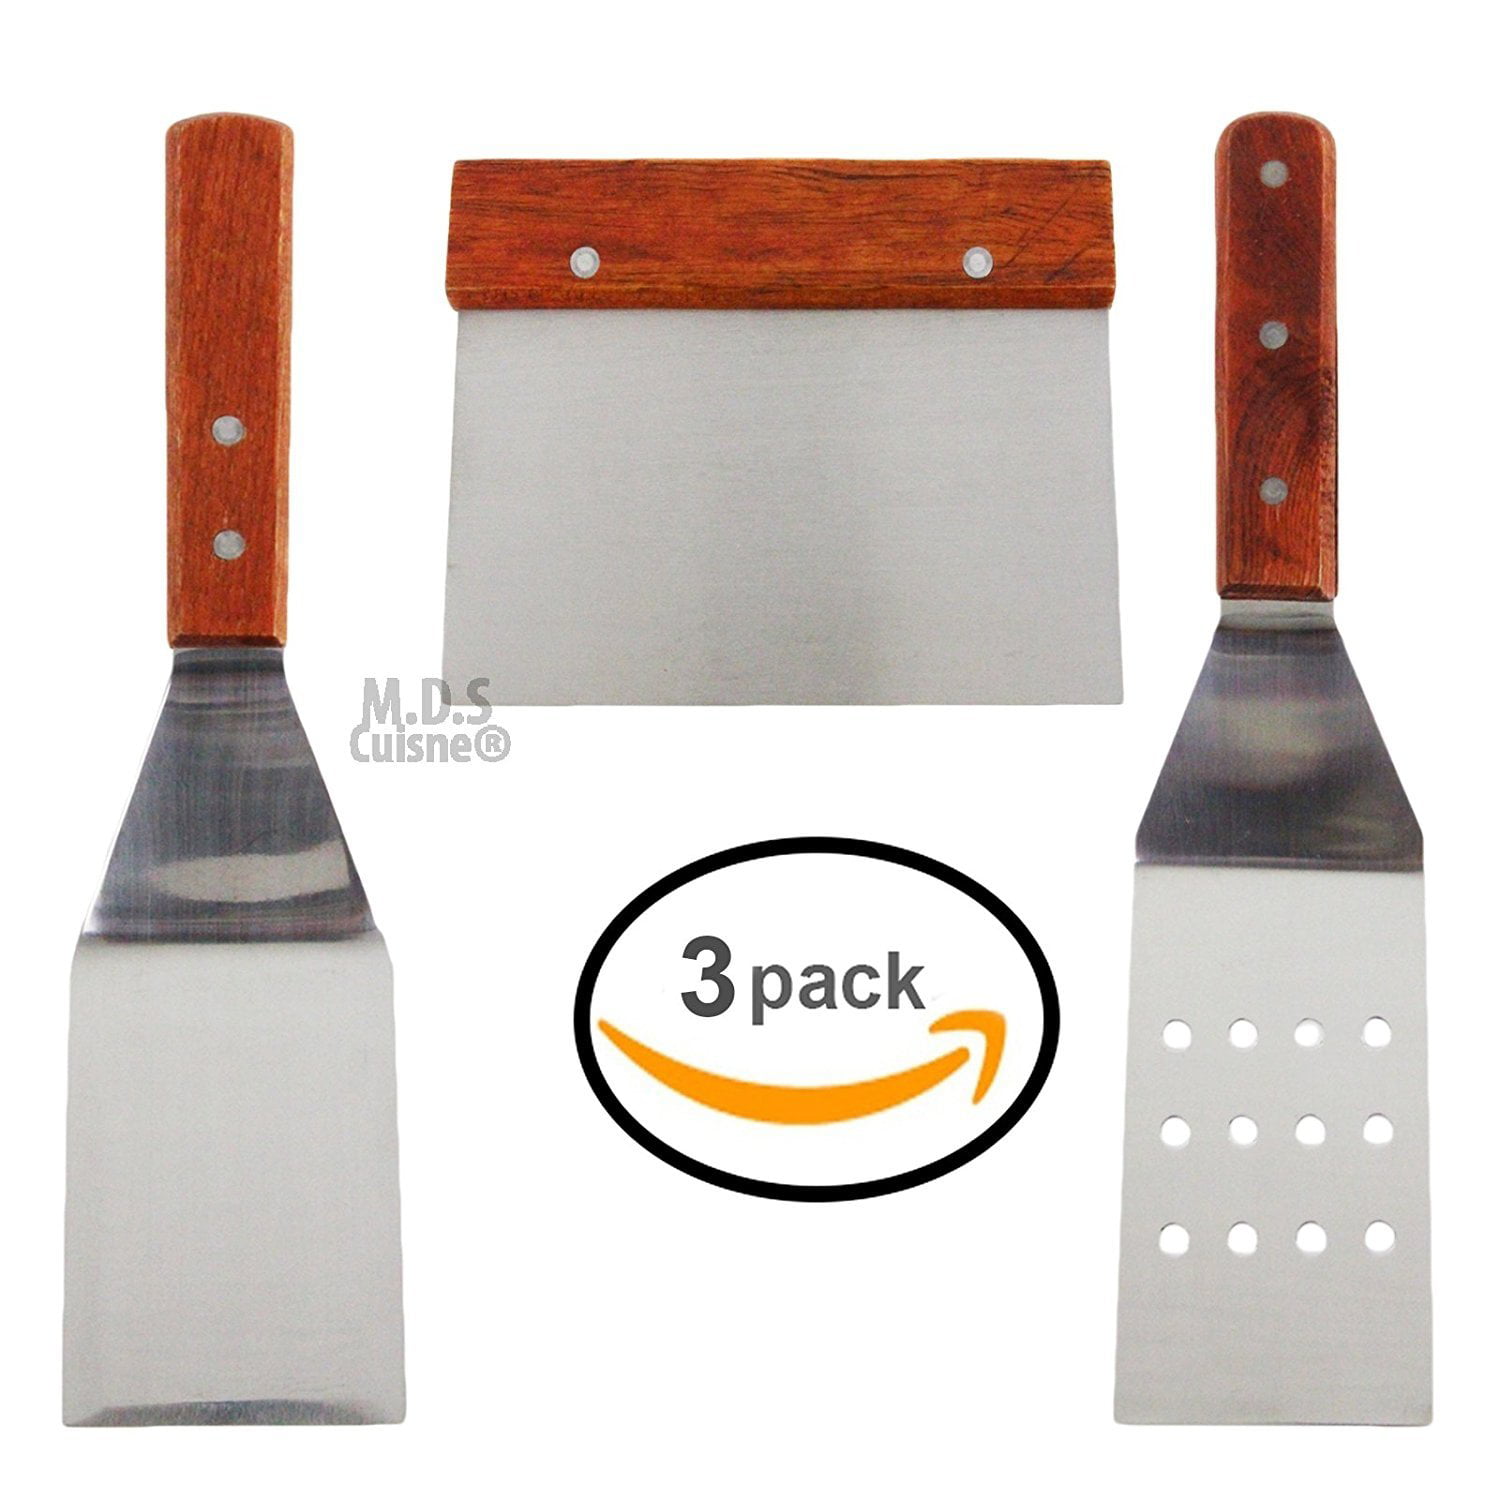 Onlyfire Multi-purpose Grill and Griddle Spatula Set Fits for Blackstone Grill, 